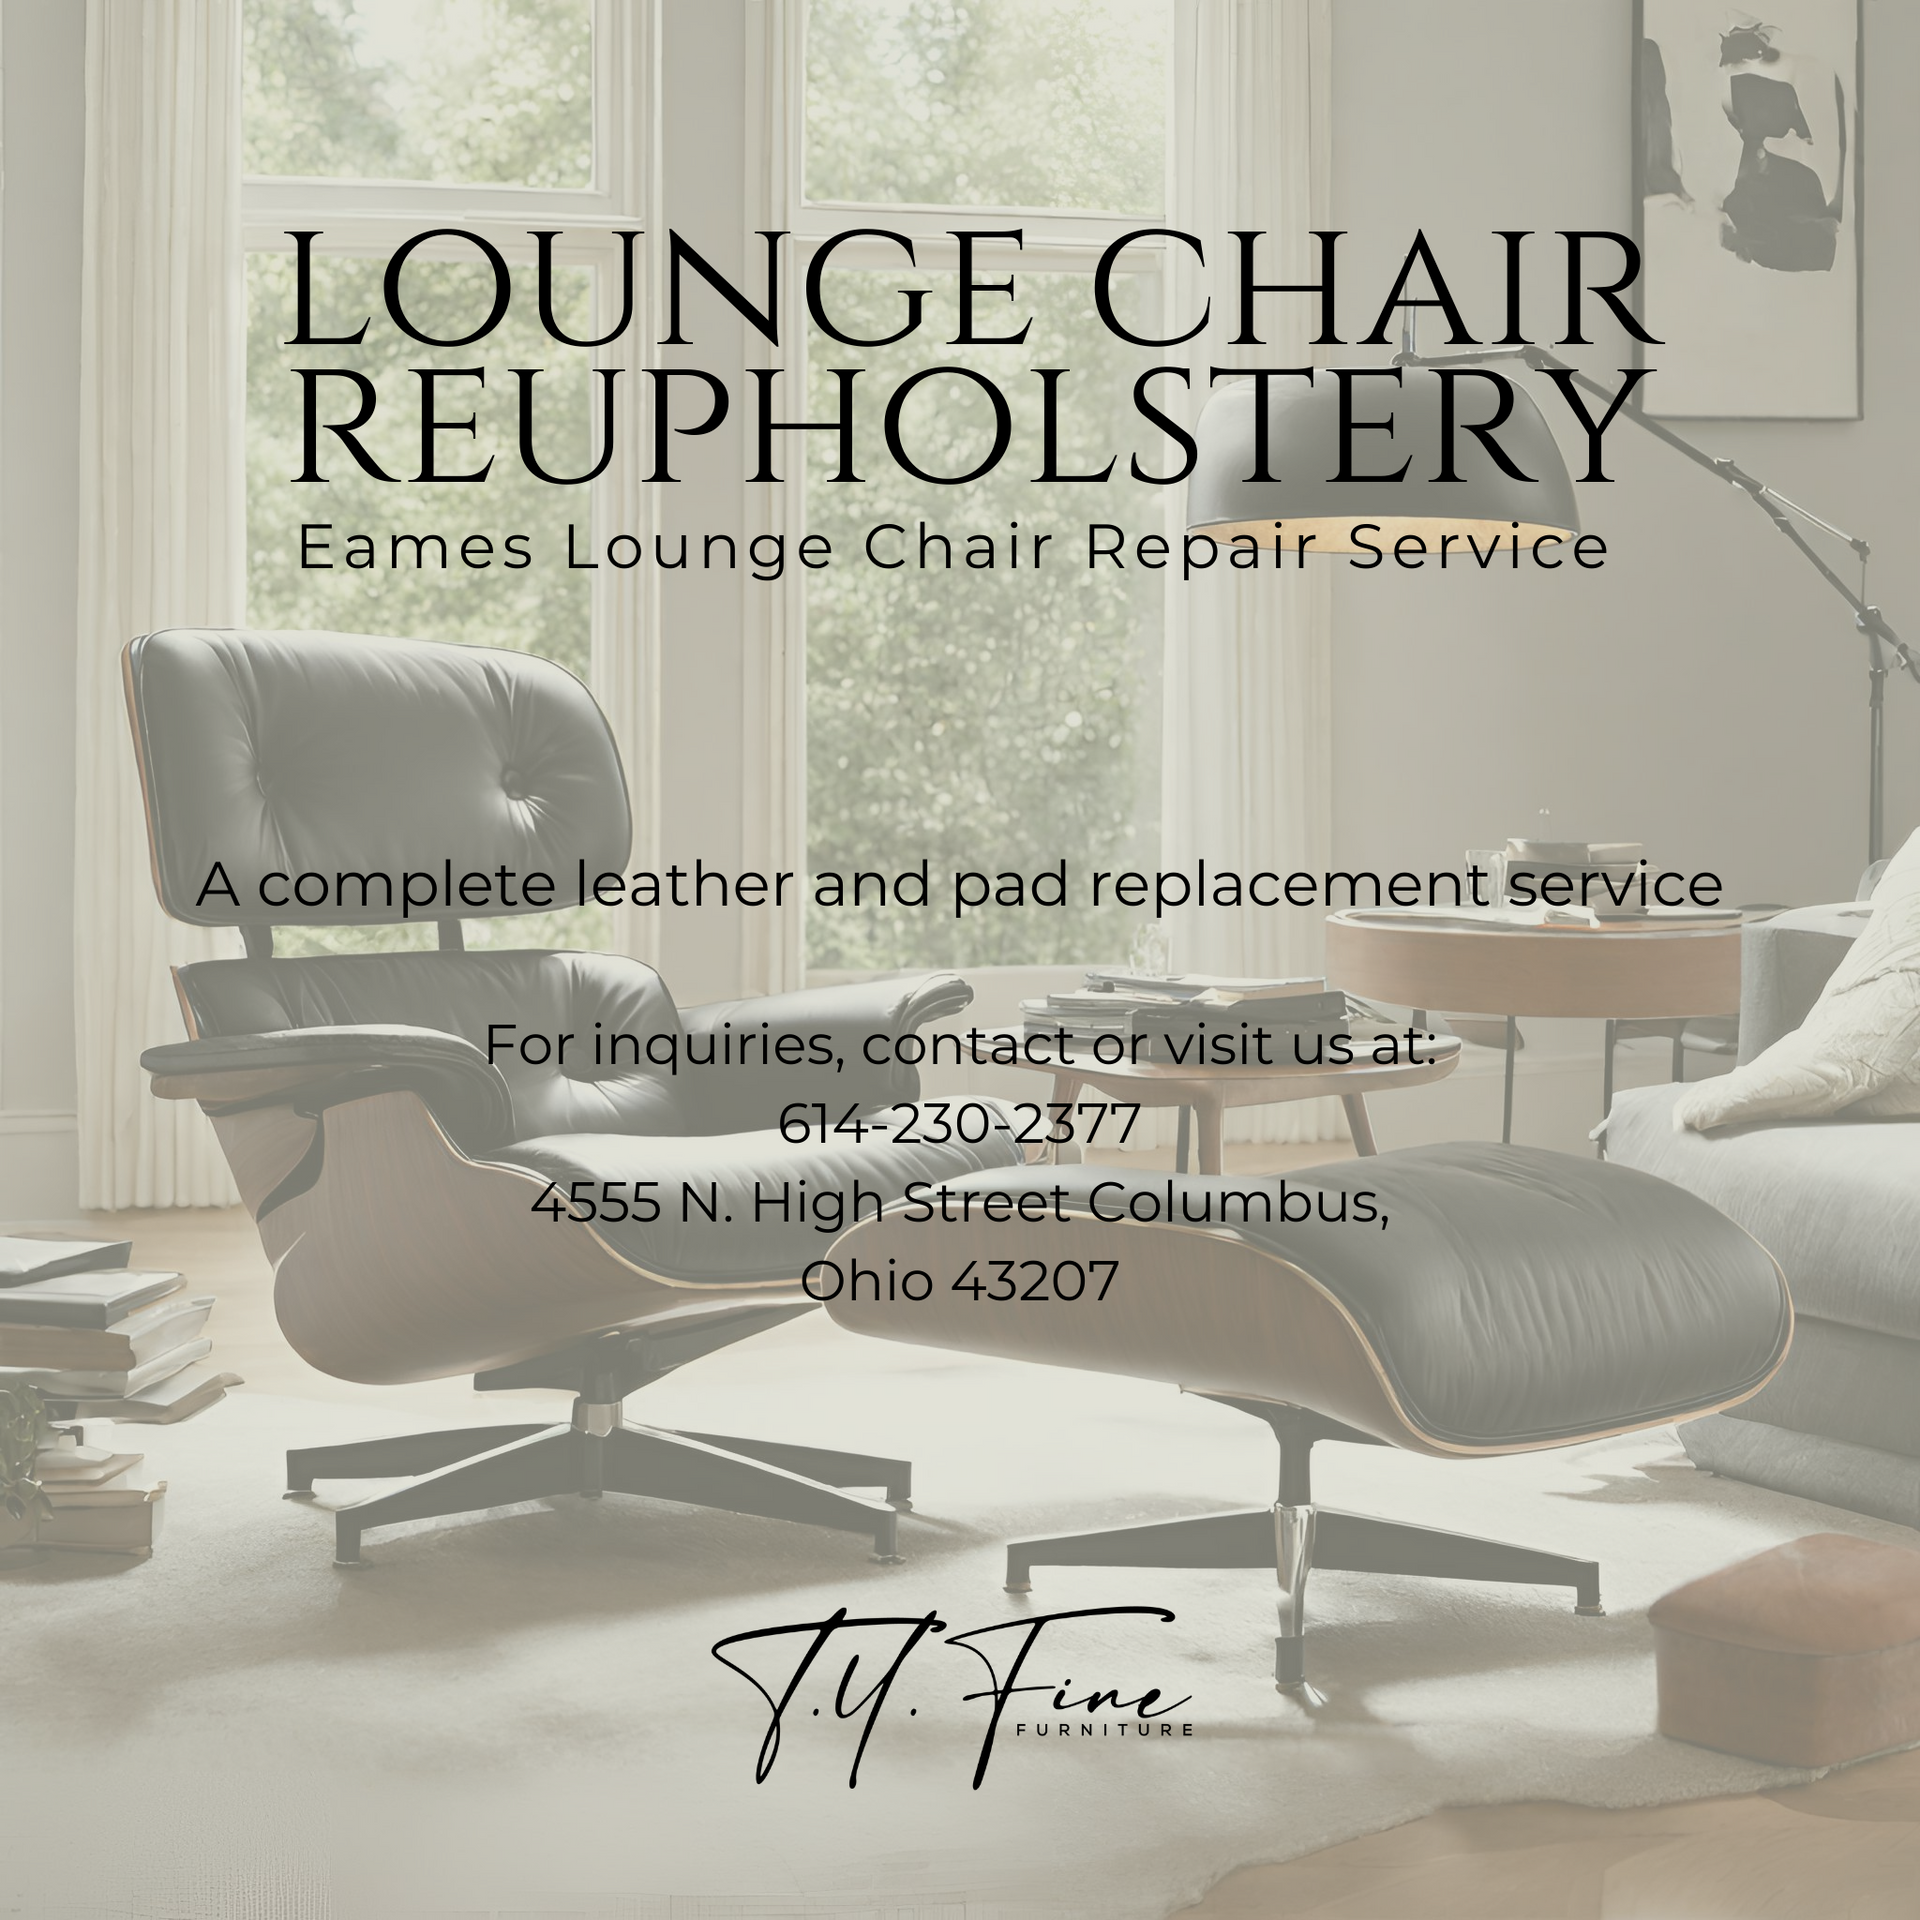 Eames Lounge Chair repair service contact info